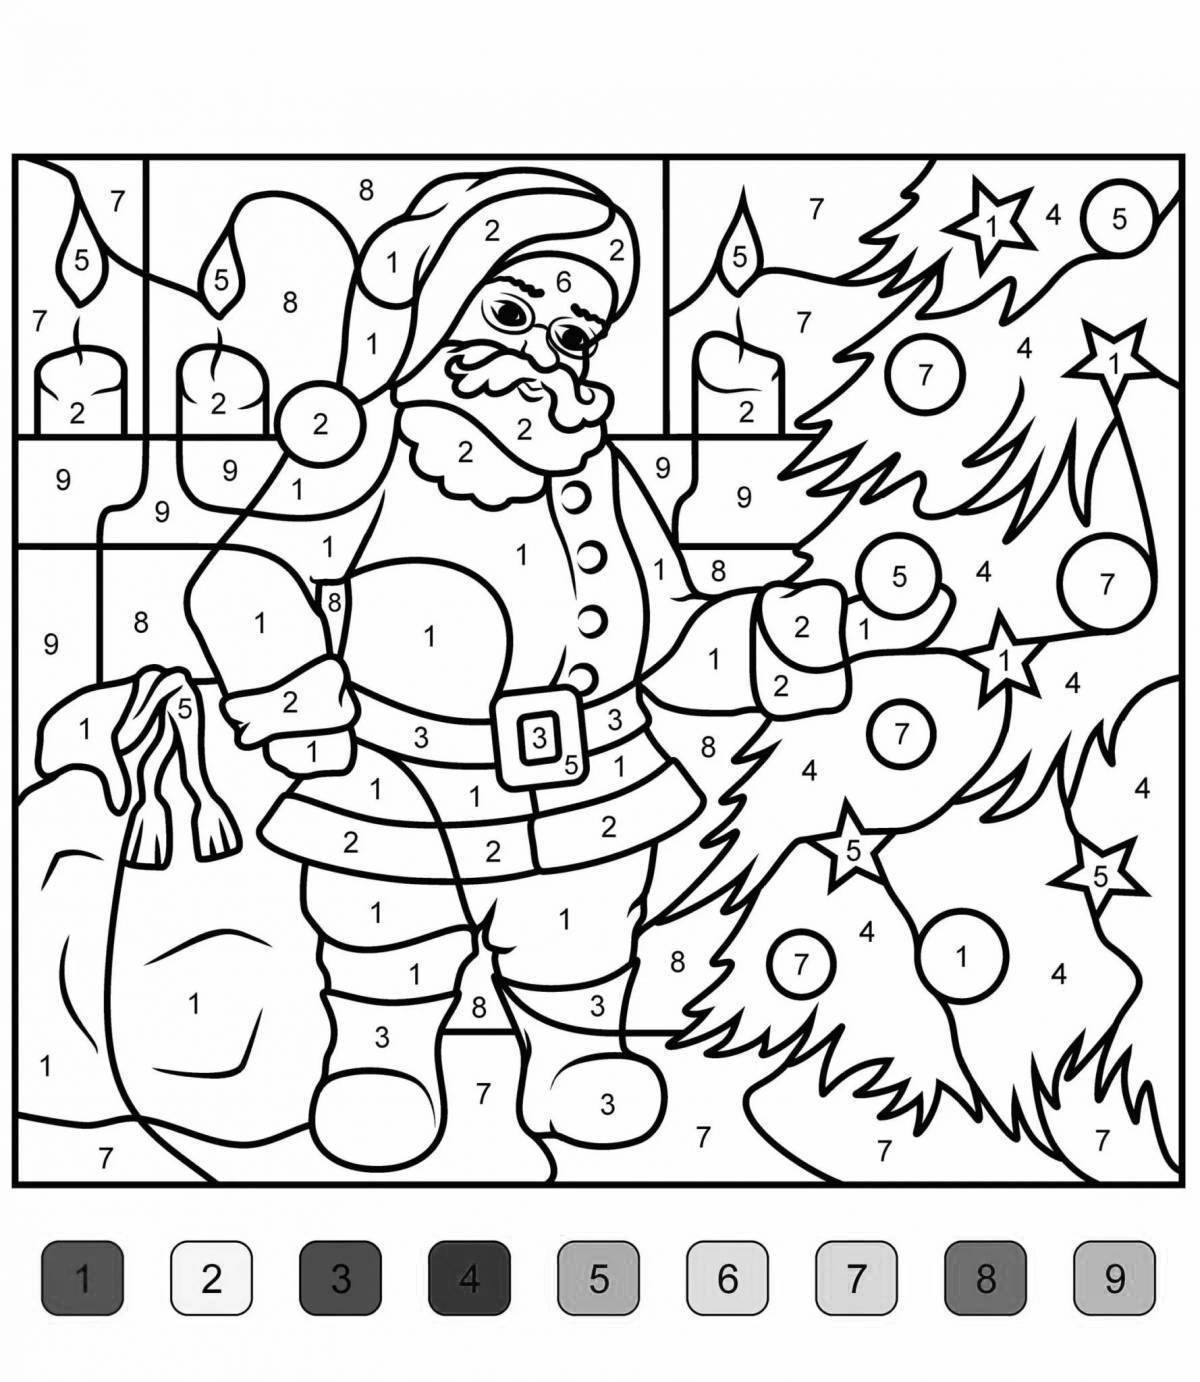 A colorful Christmas coloring game